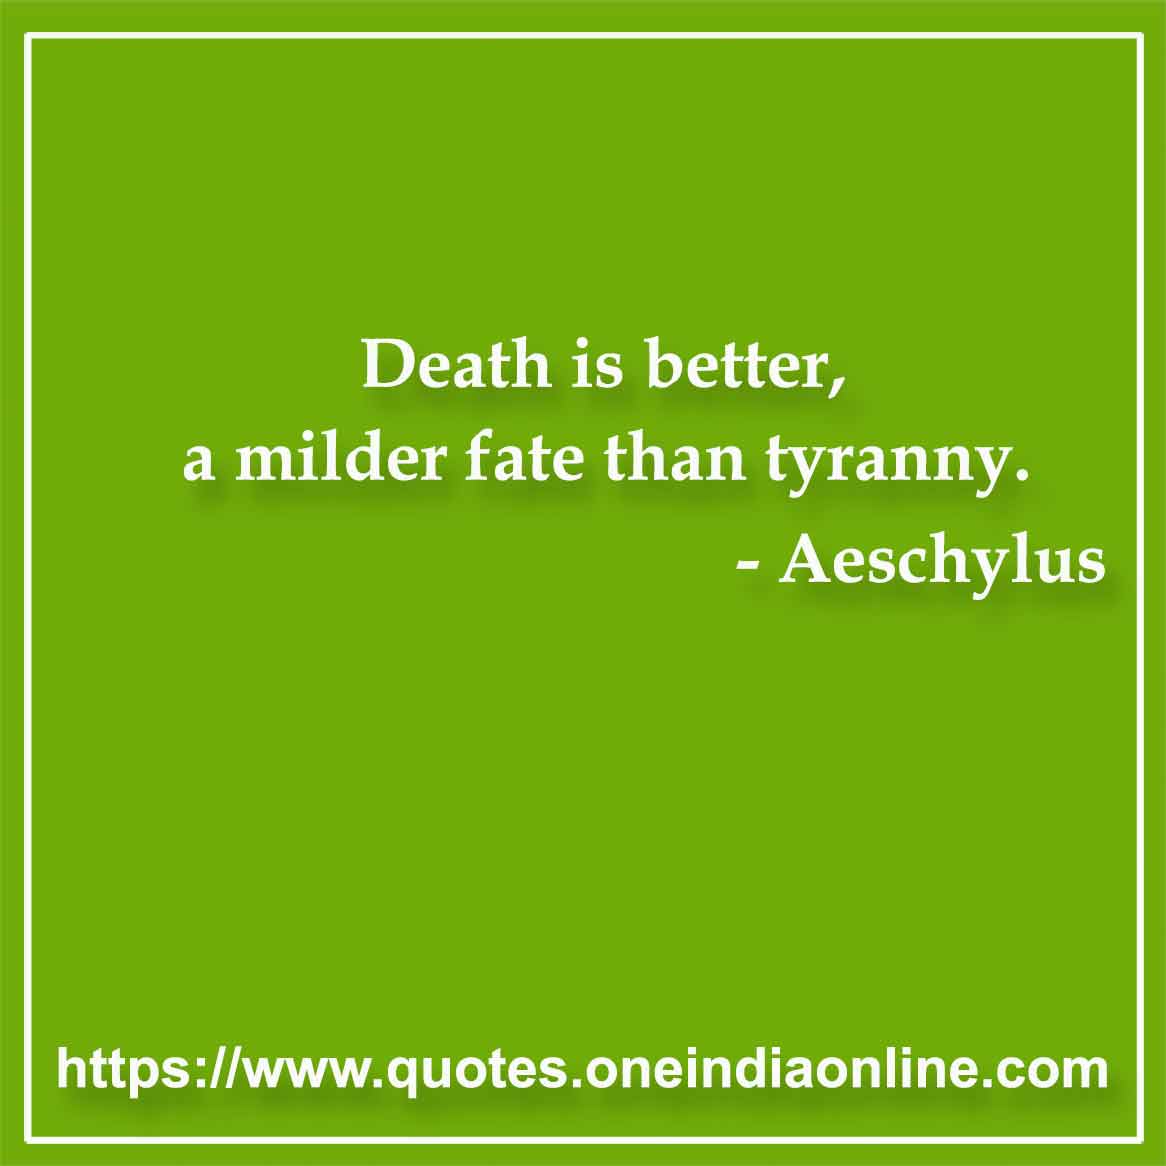 Death is better, a milder fate than tyranny.

- Death Quotes by Aeschylus